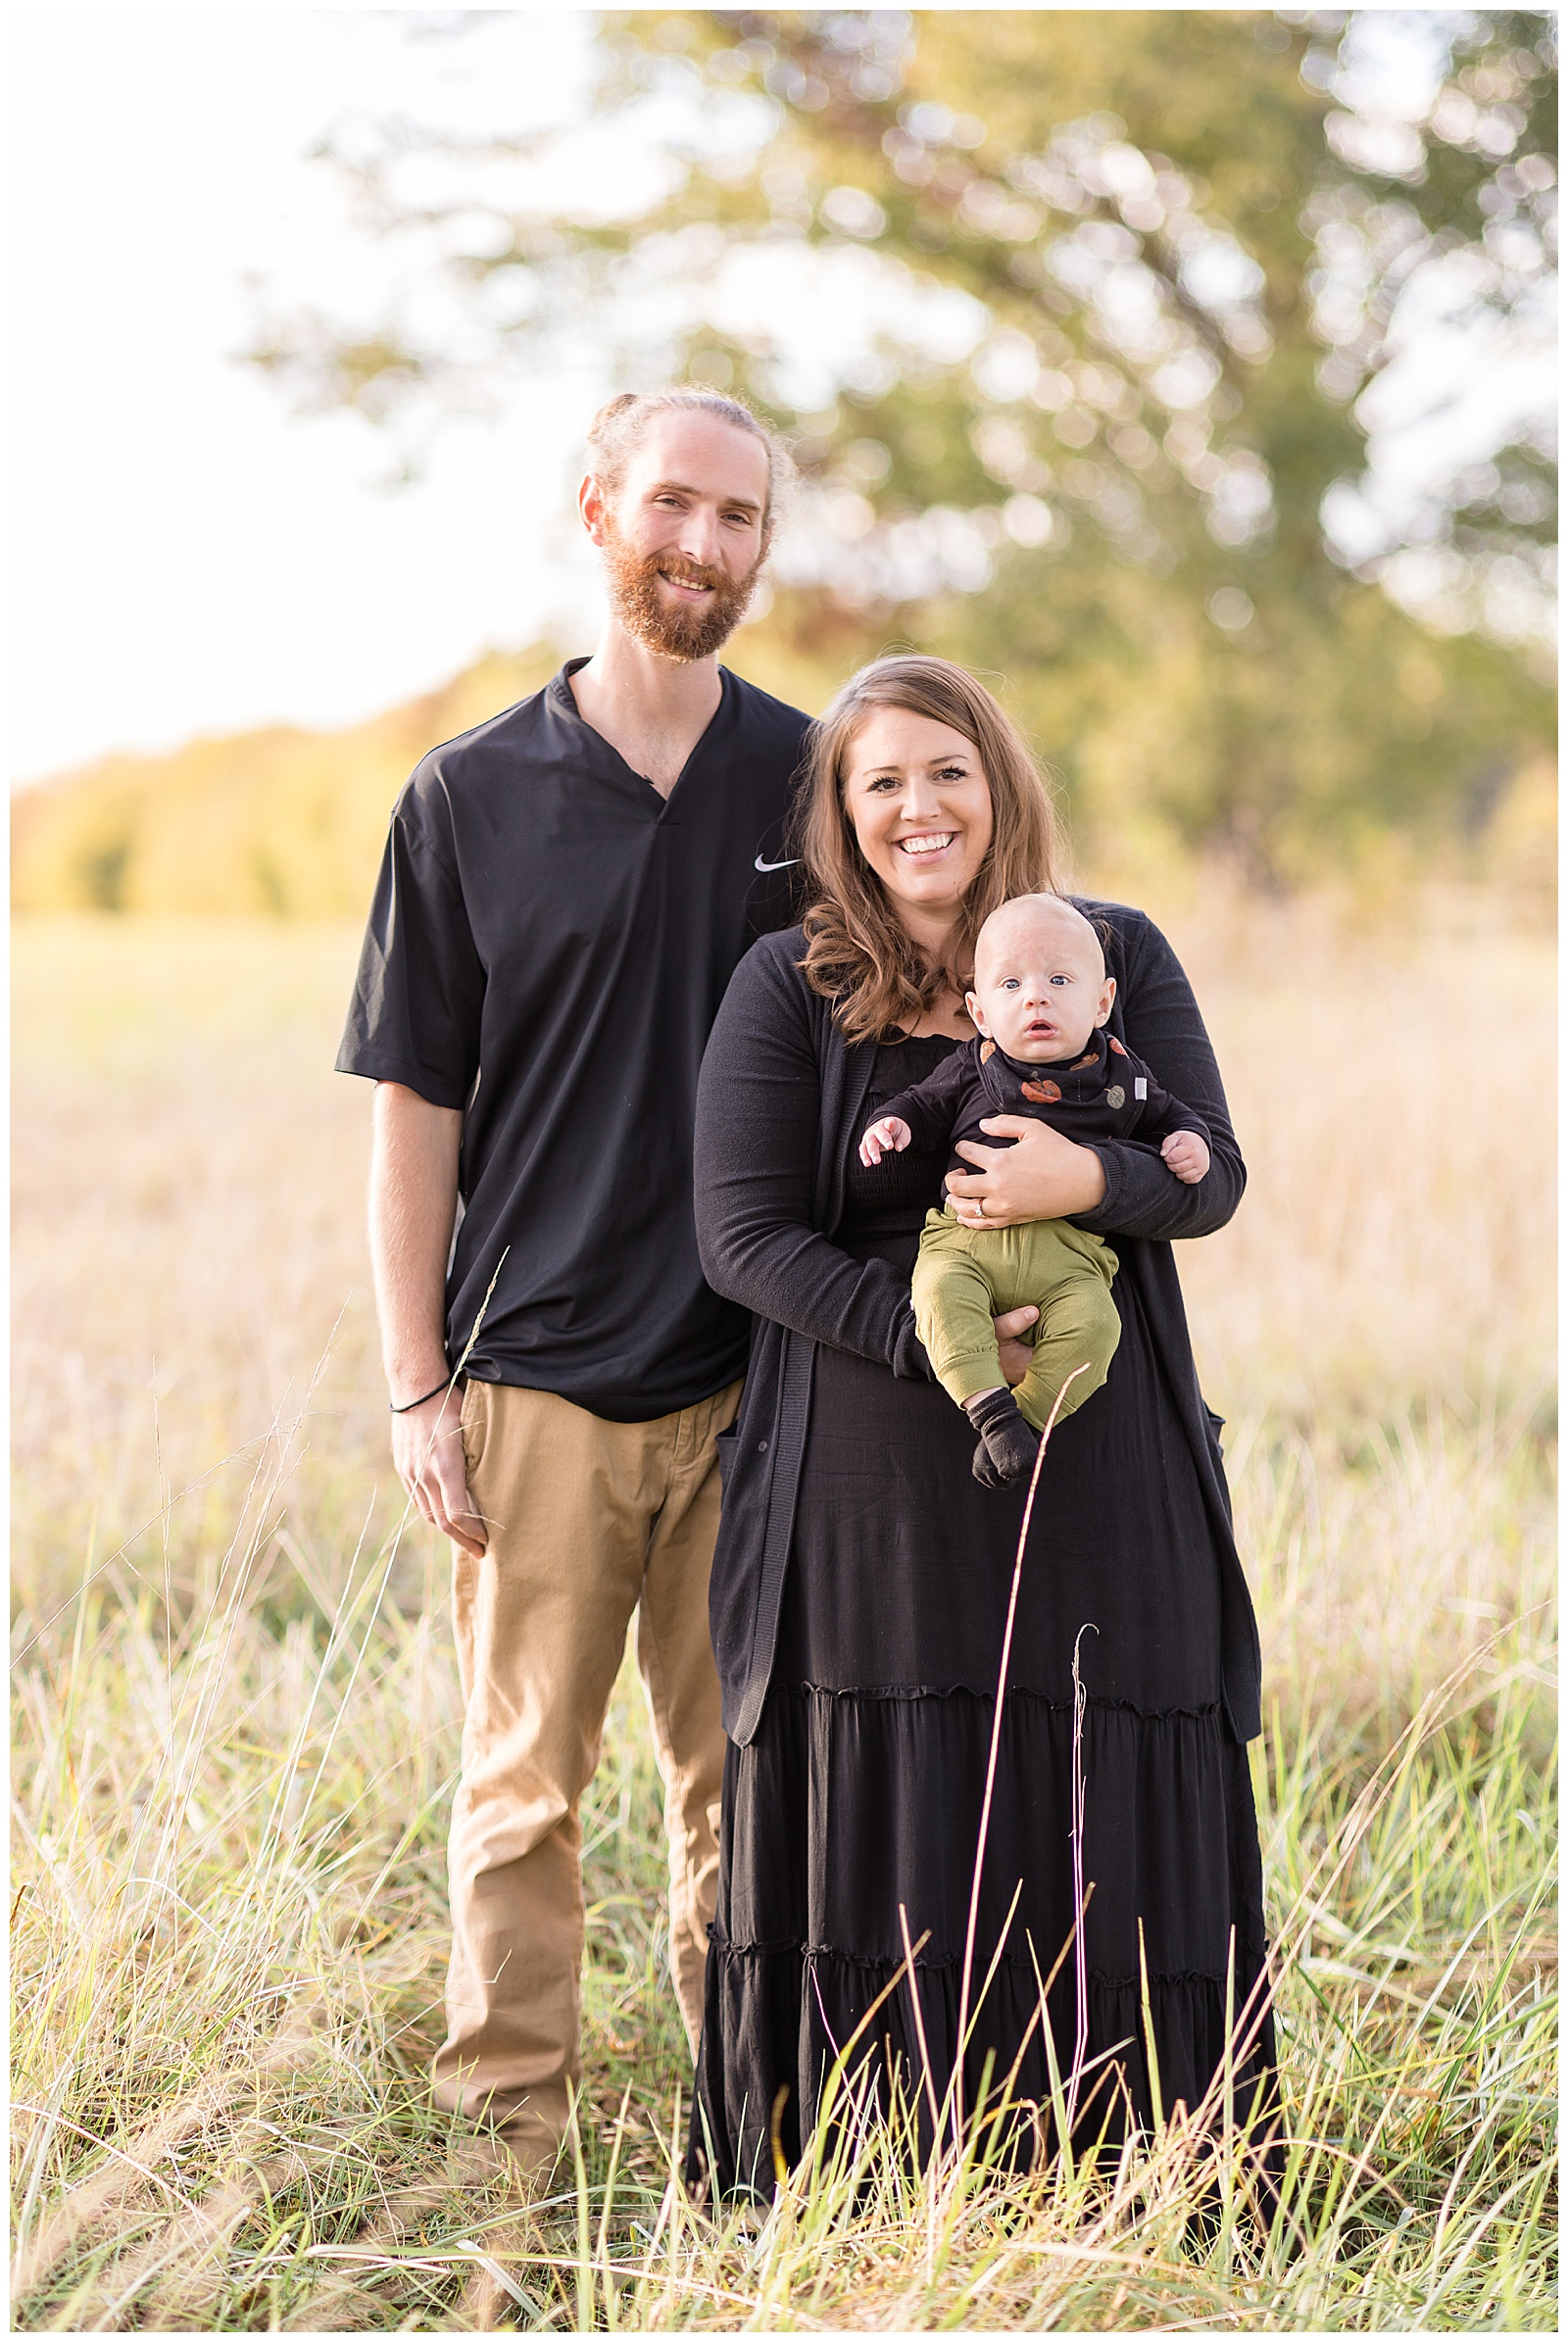 Rebecca Rice captures family of 3 in a field in Richmond, VA as a newly family of 3 wear black coordinating outfits.